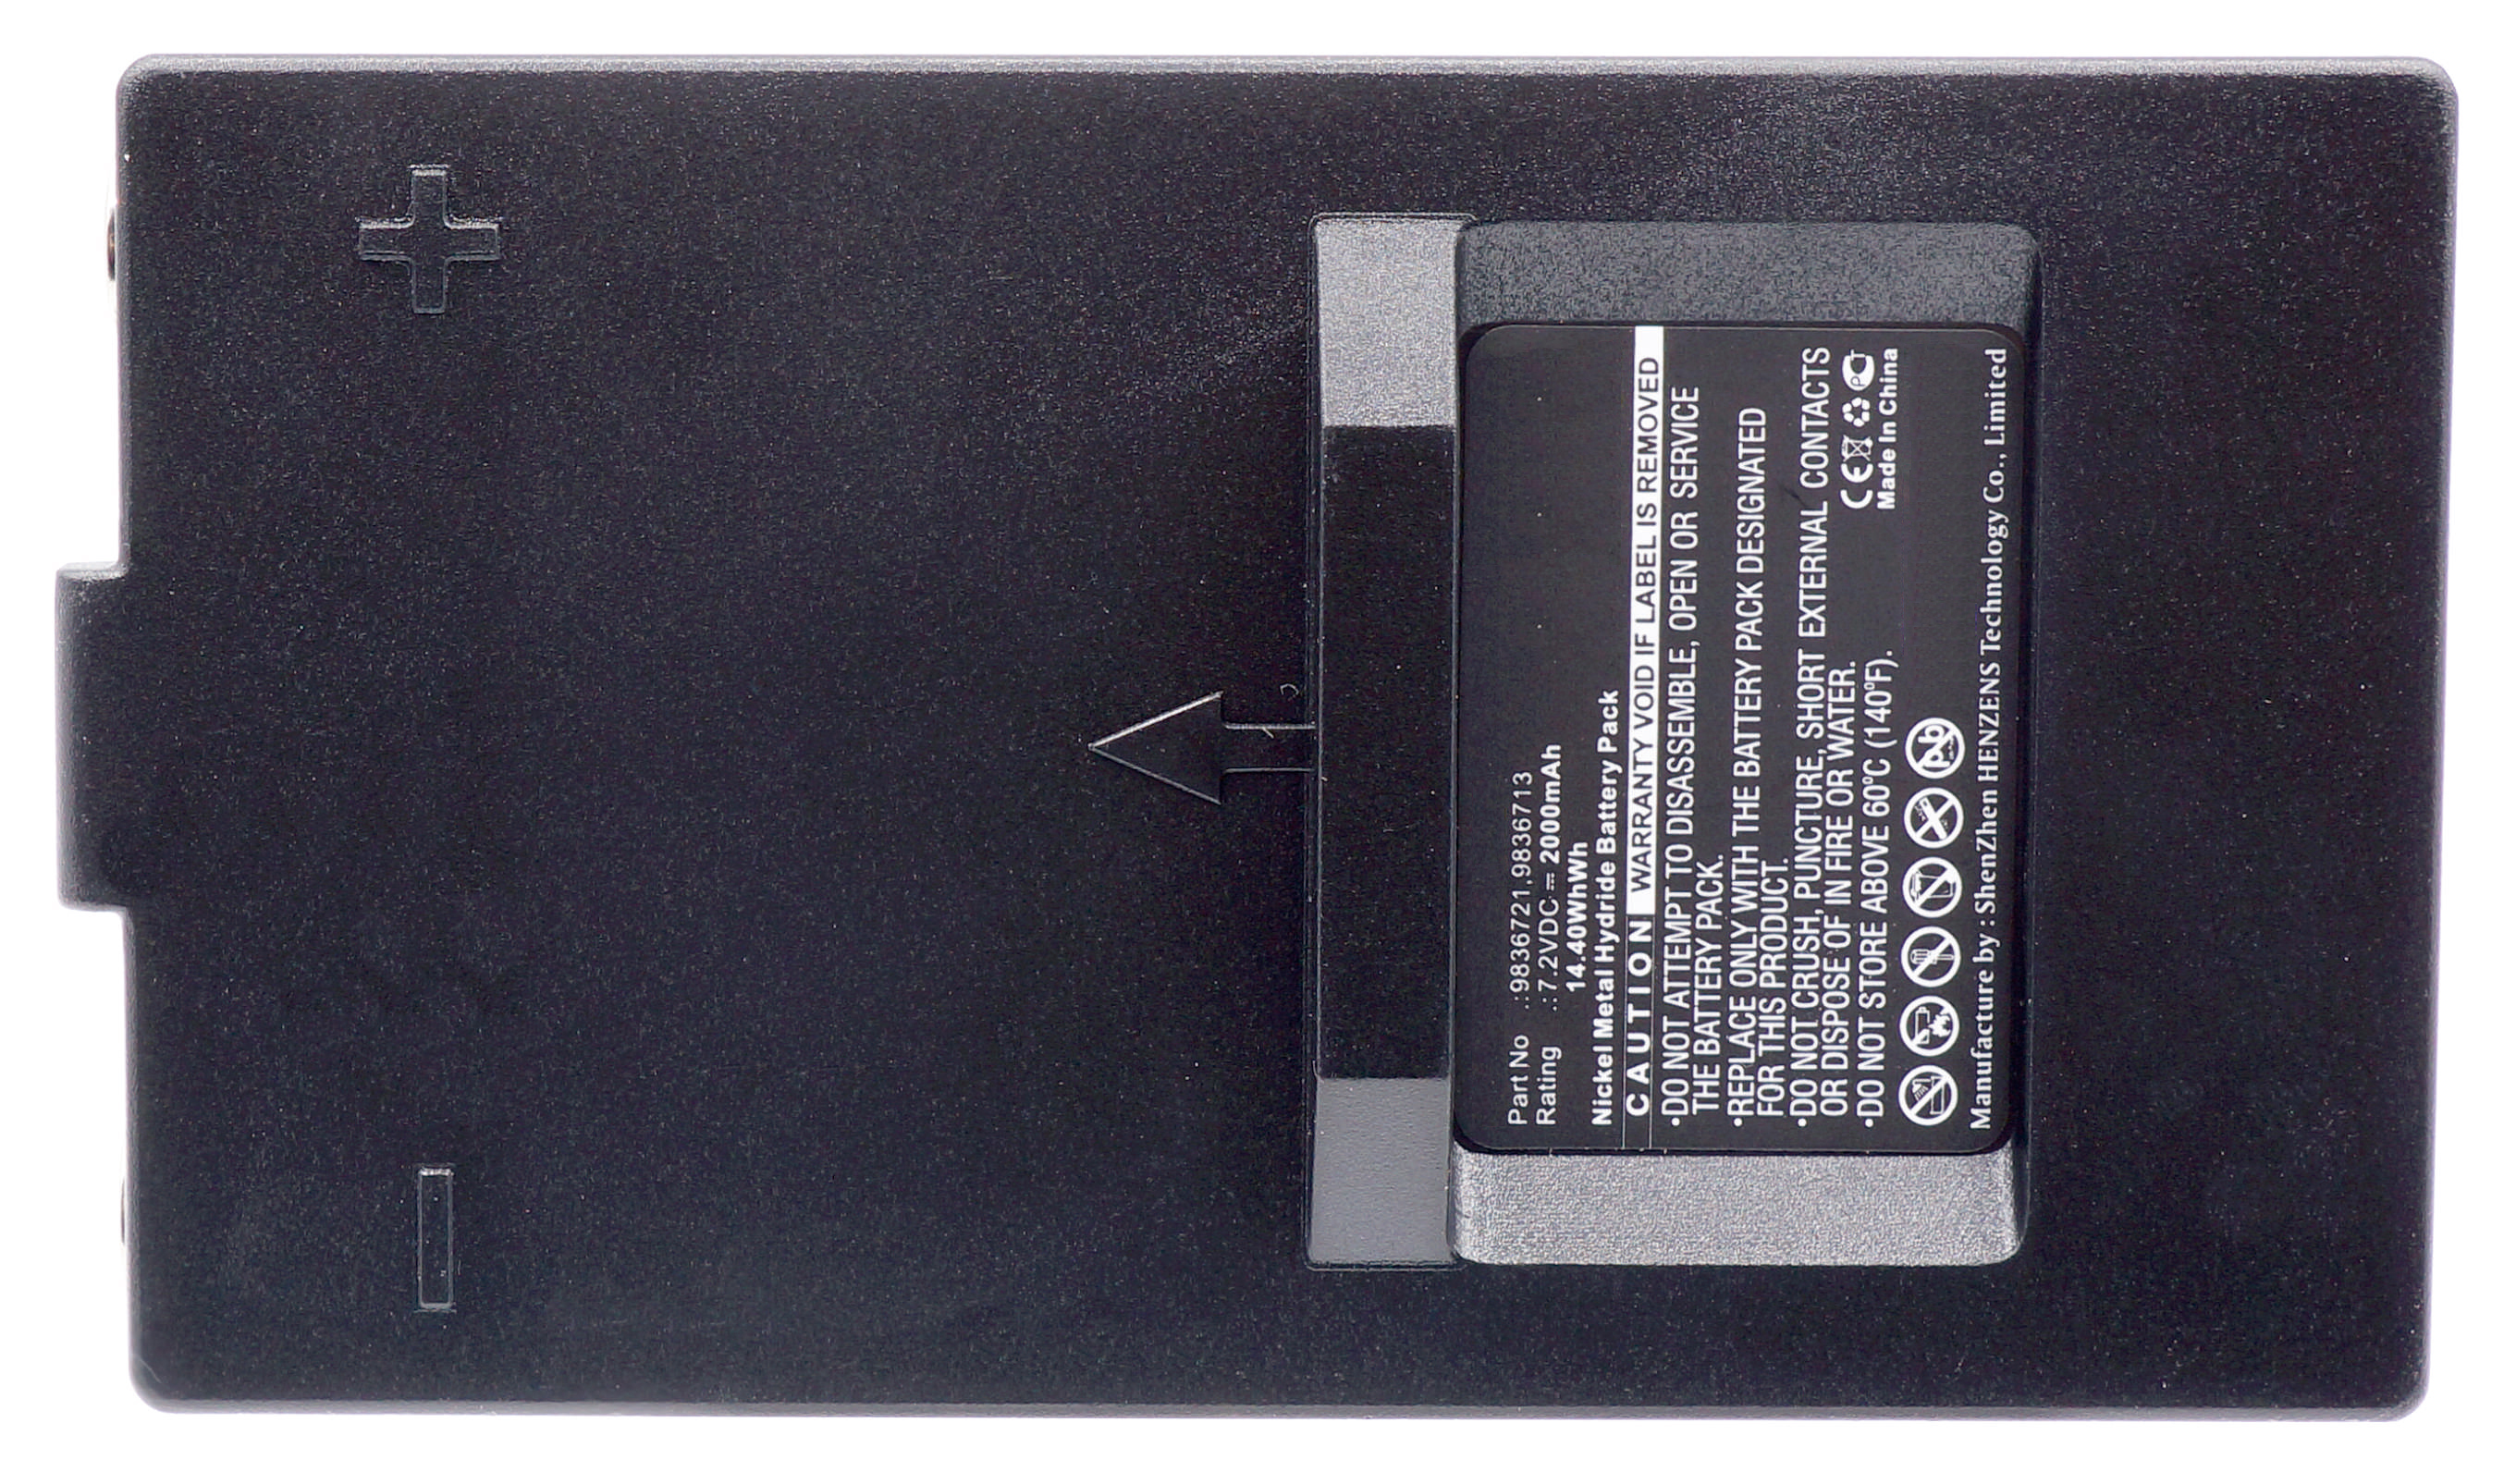 Synergy Digital Battery Compatible With Hiab 983.6713 Replacement Battery - (Ni-MH, 7.2V, 2000 mAh)